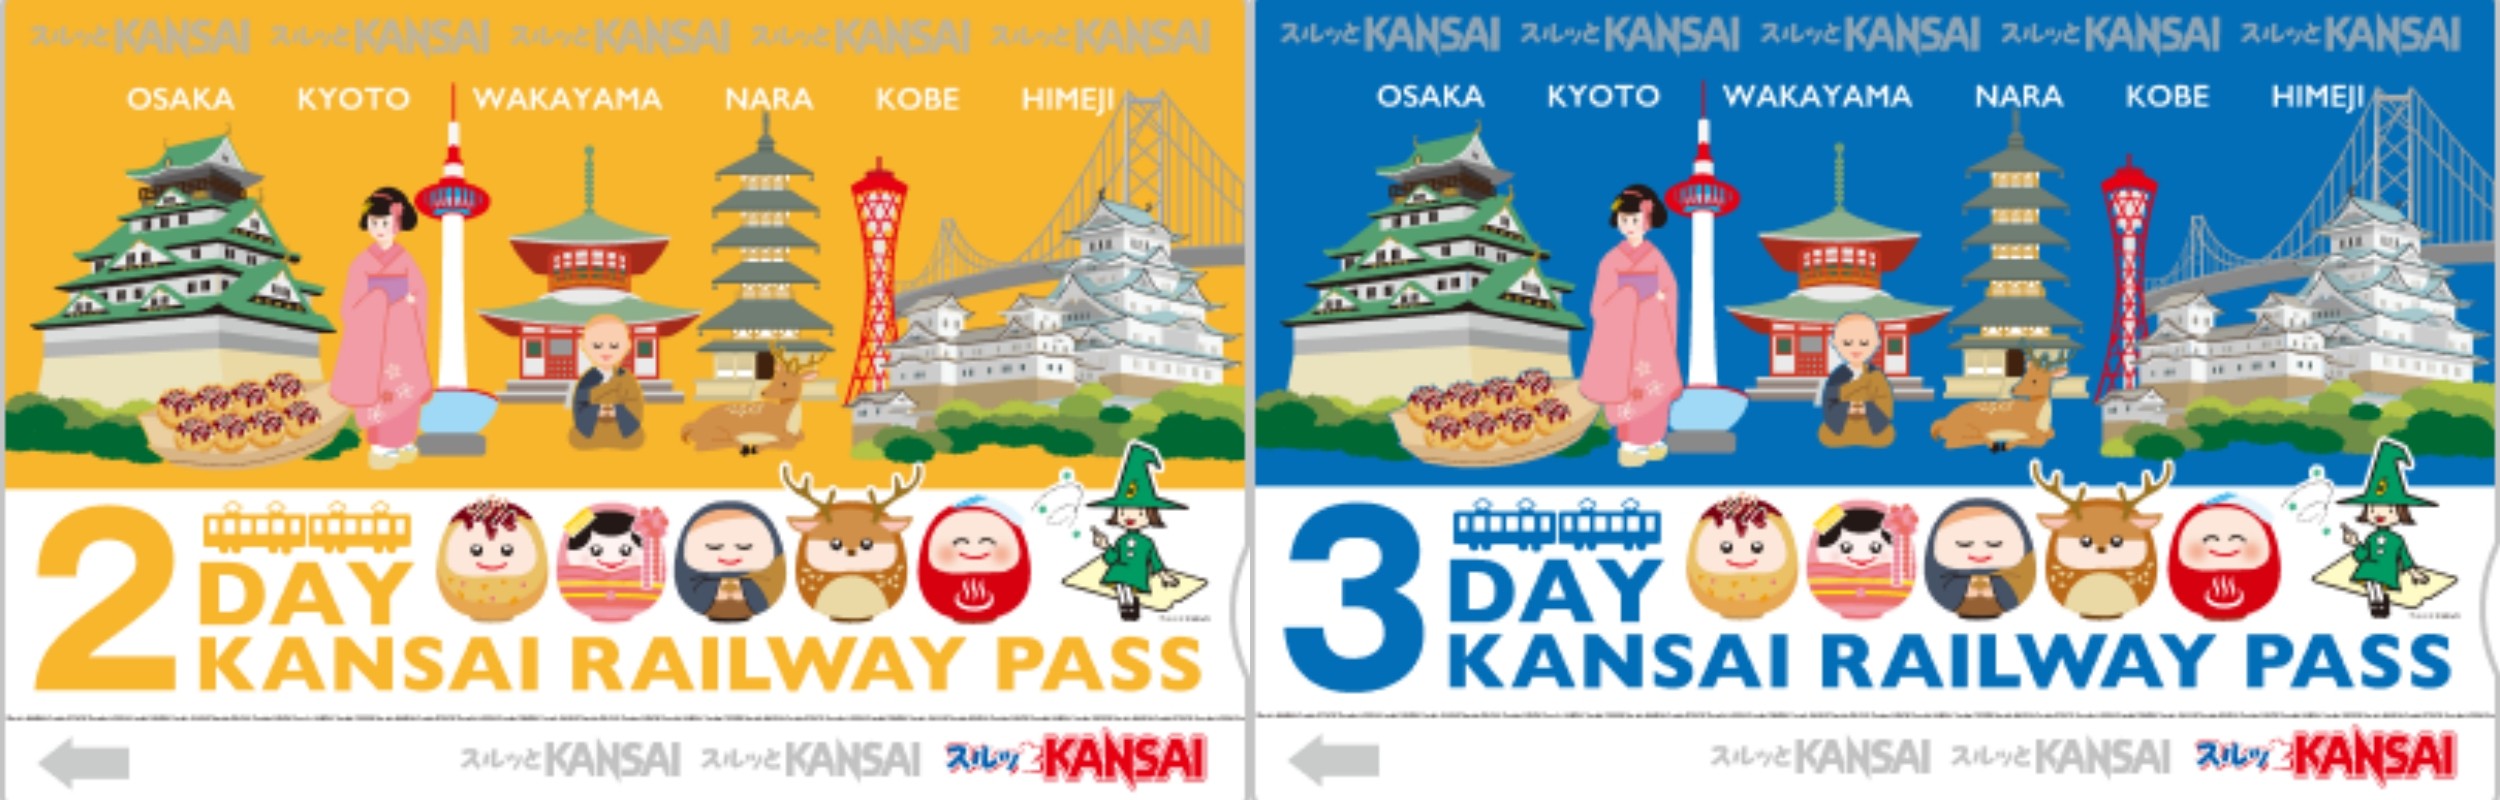 Where to buy the 'KANSAI RAILWAY PASS' and sales details